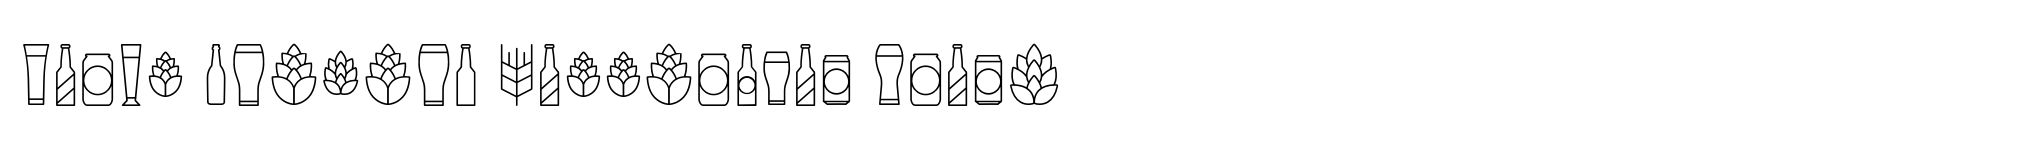 Local Brewery Collection Icons image